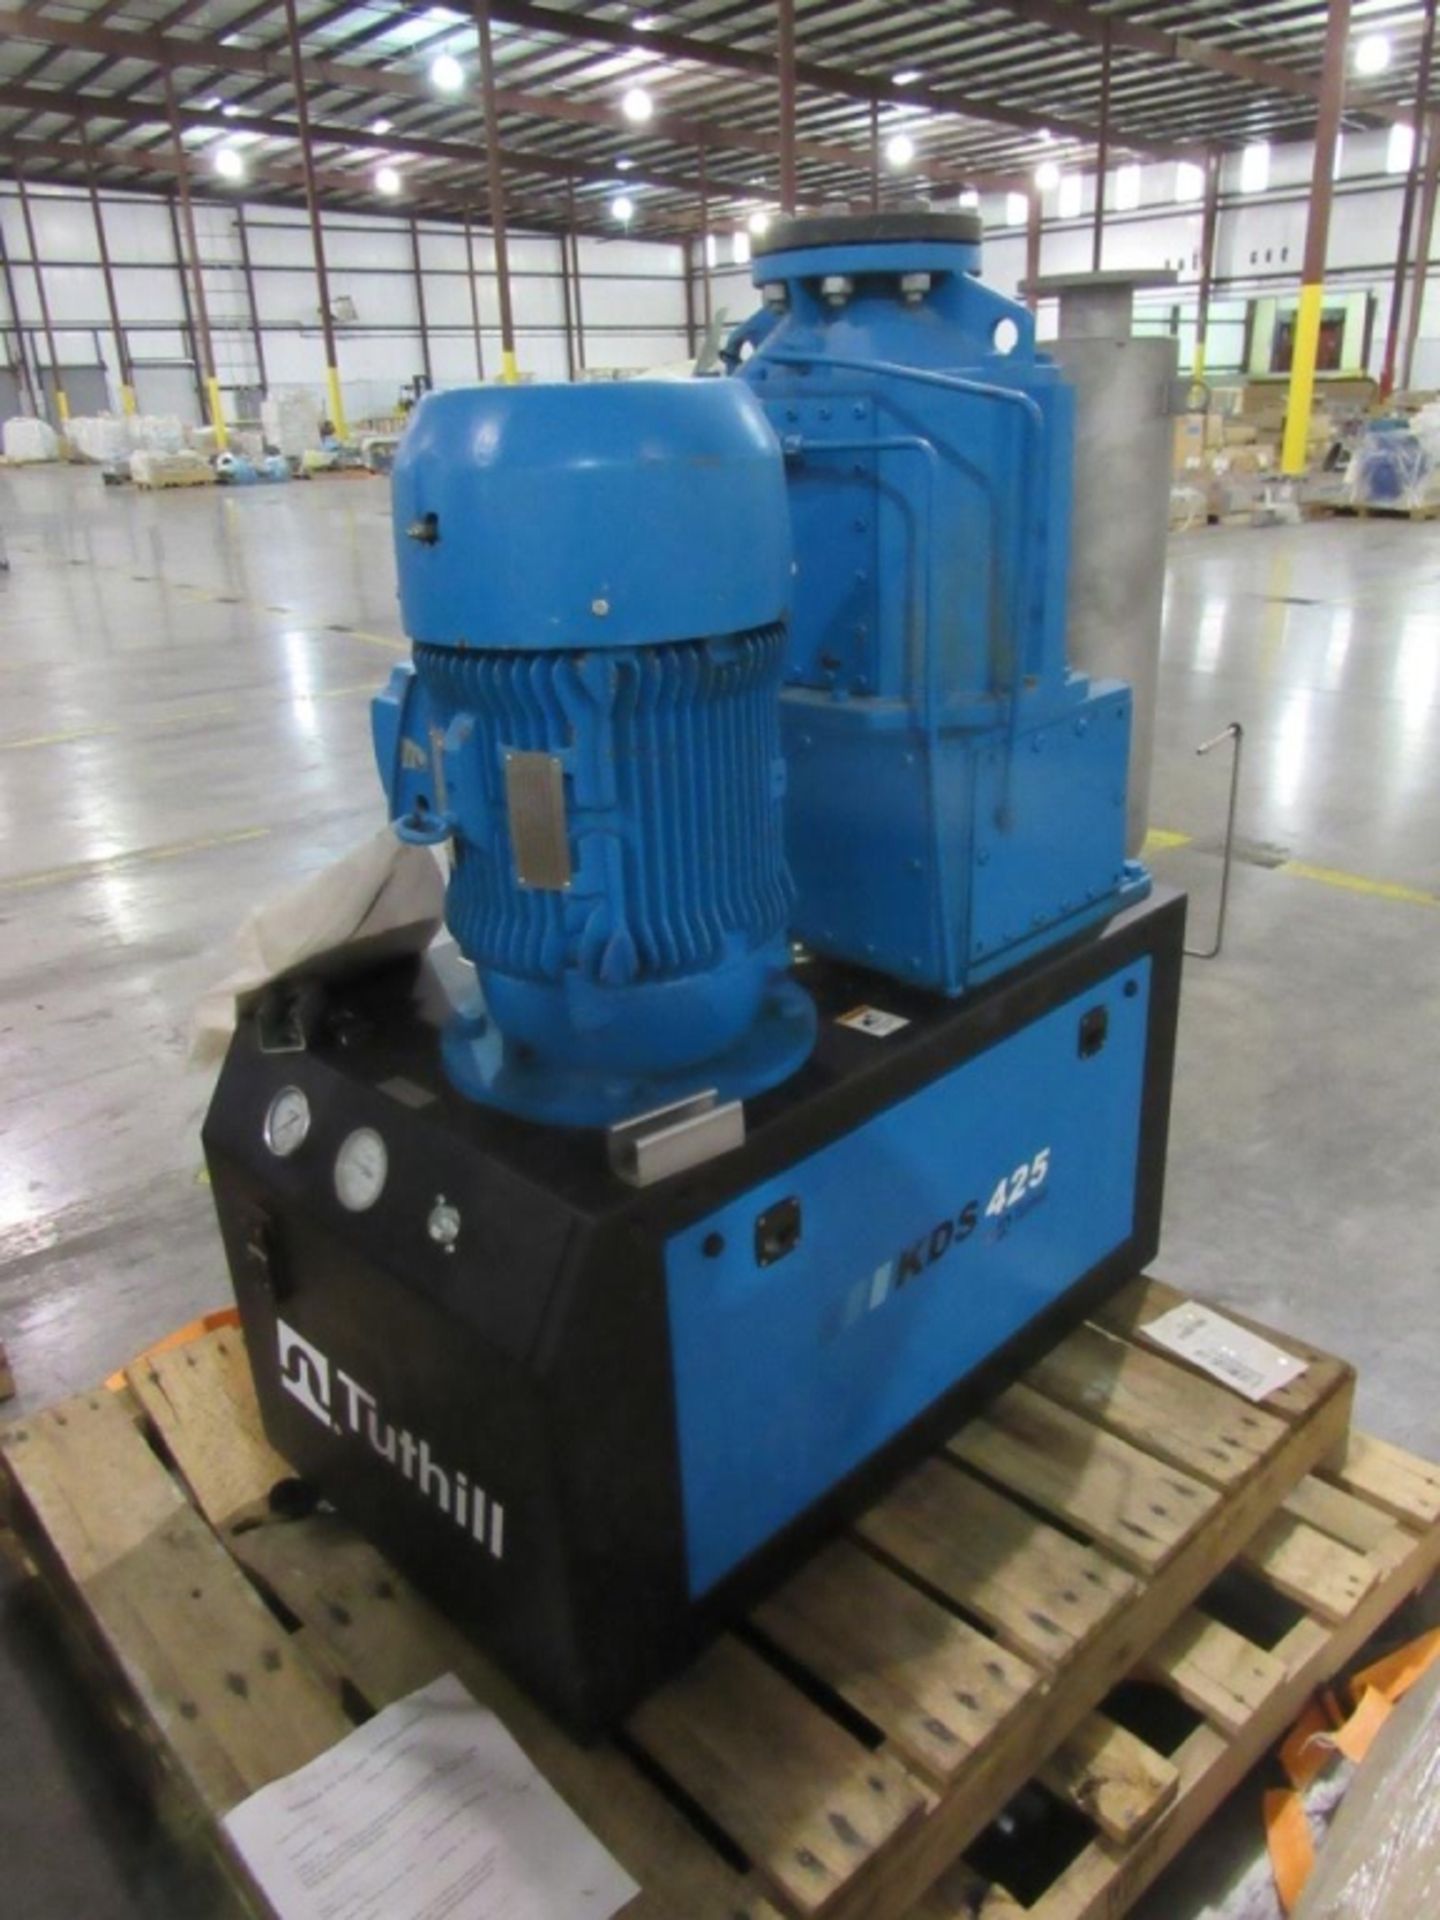 Tuthill KDS 425 Screw Vacuum Pump- ***Located in Cleveland, TN*** MFR - Tuthill Model - KDS 425 - Image 2 of 8